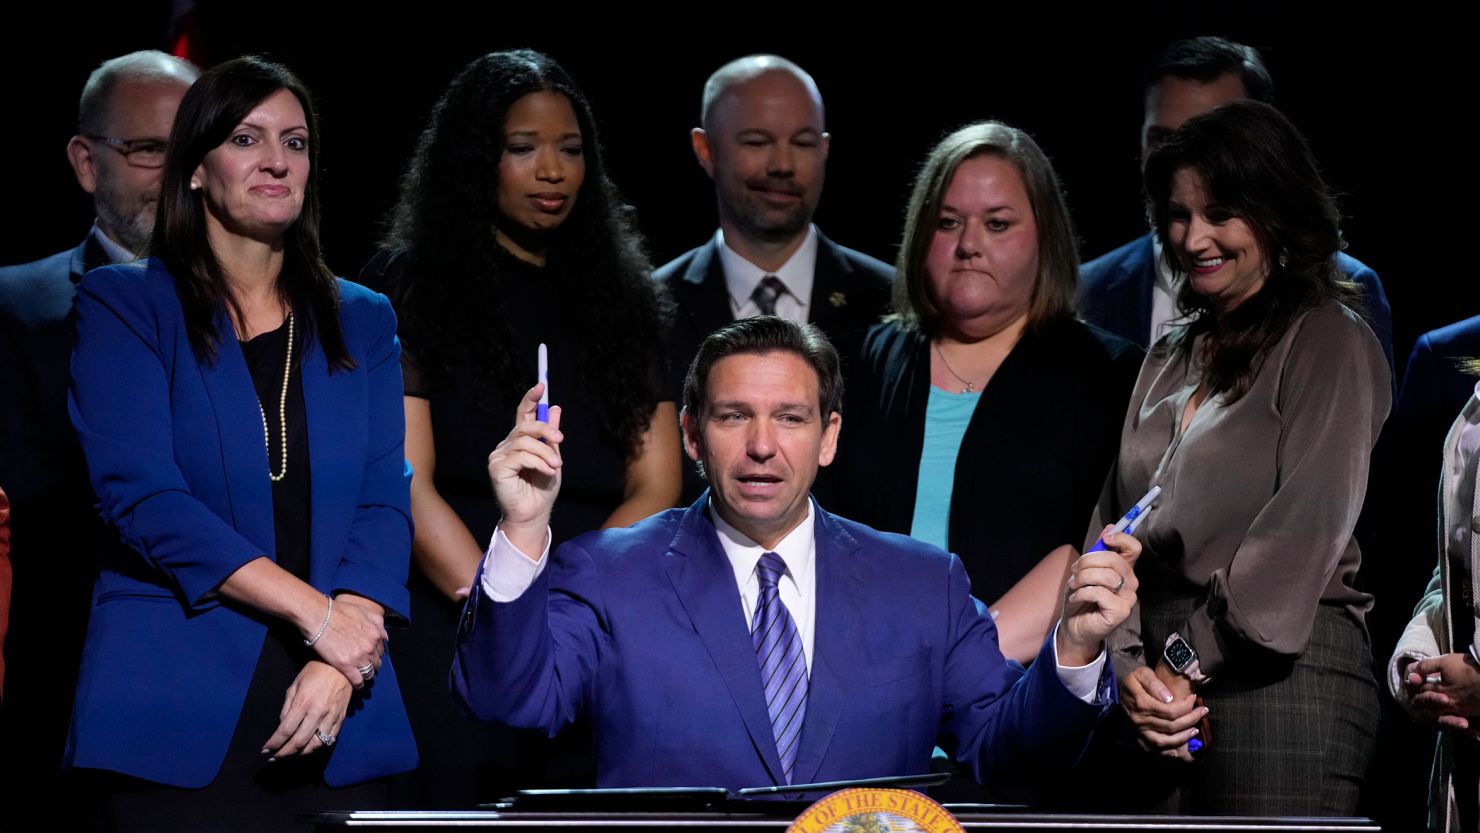 Florida Gov. Ron DeSantis asks if anyone in the audience wants a marker after signing various bills during a bill signing ceremony at the Coastal Community Church at Lighthouse Point, Florida, on May 16, 2023.